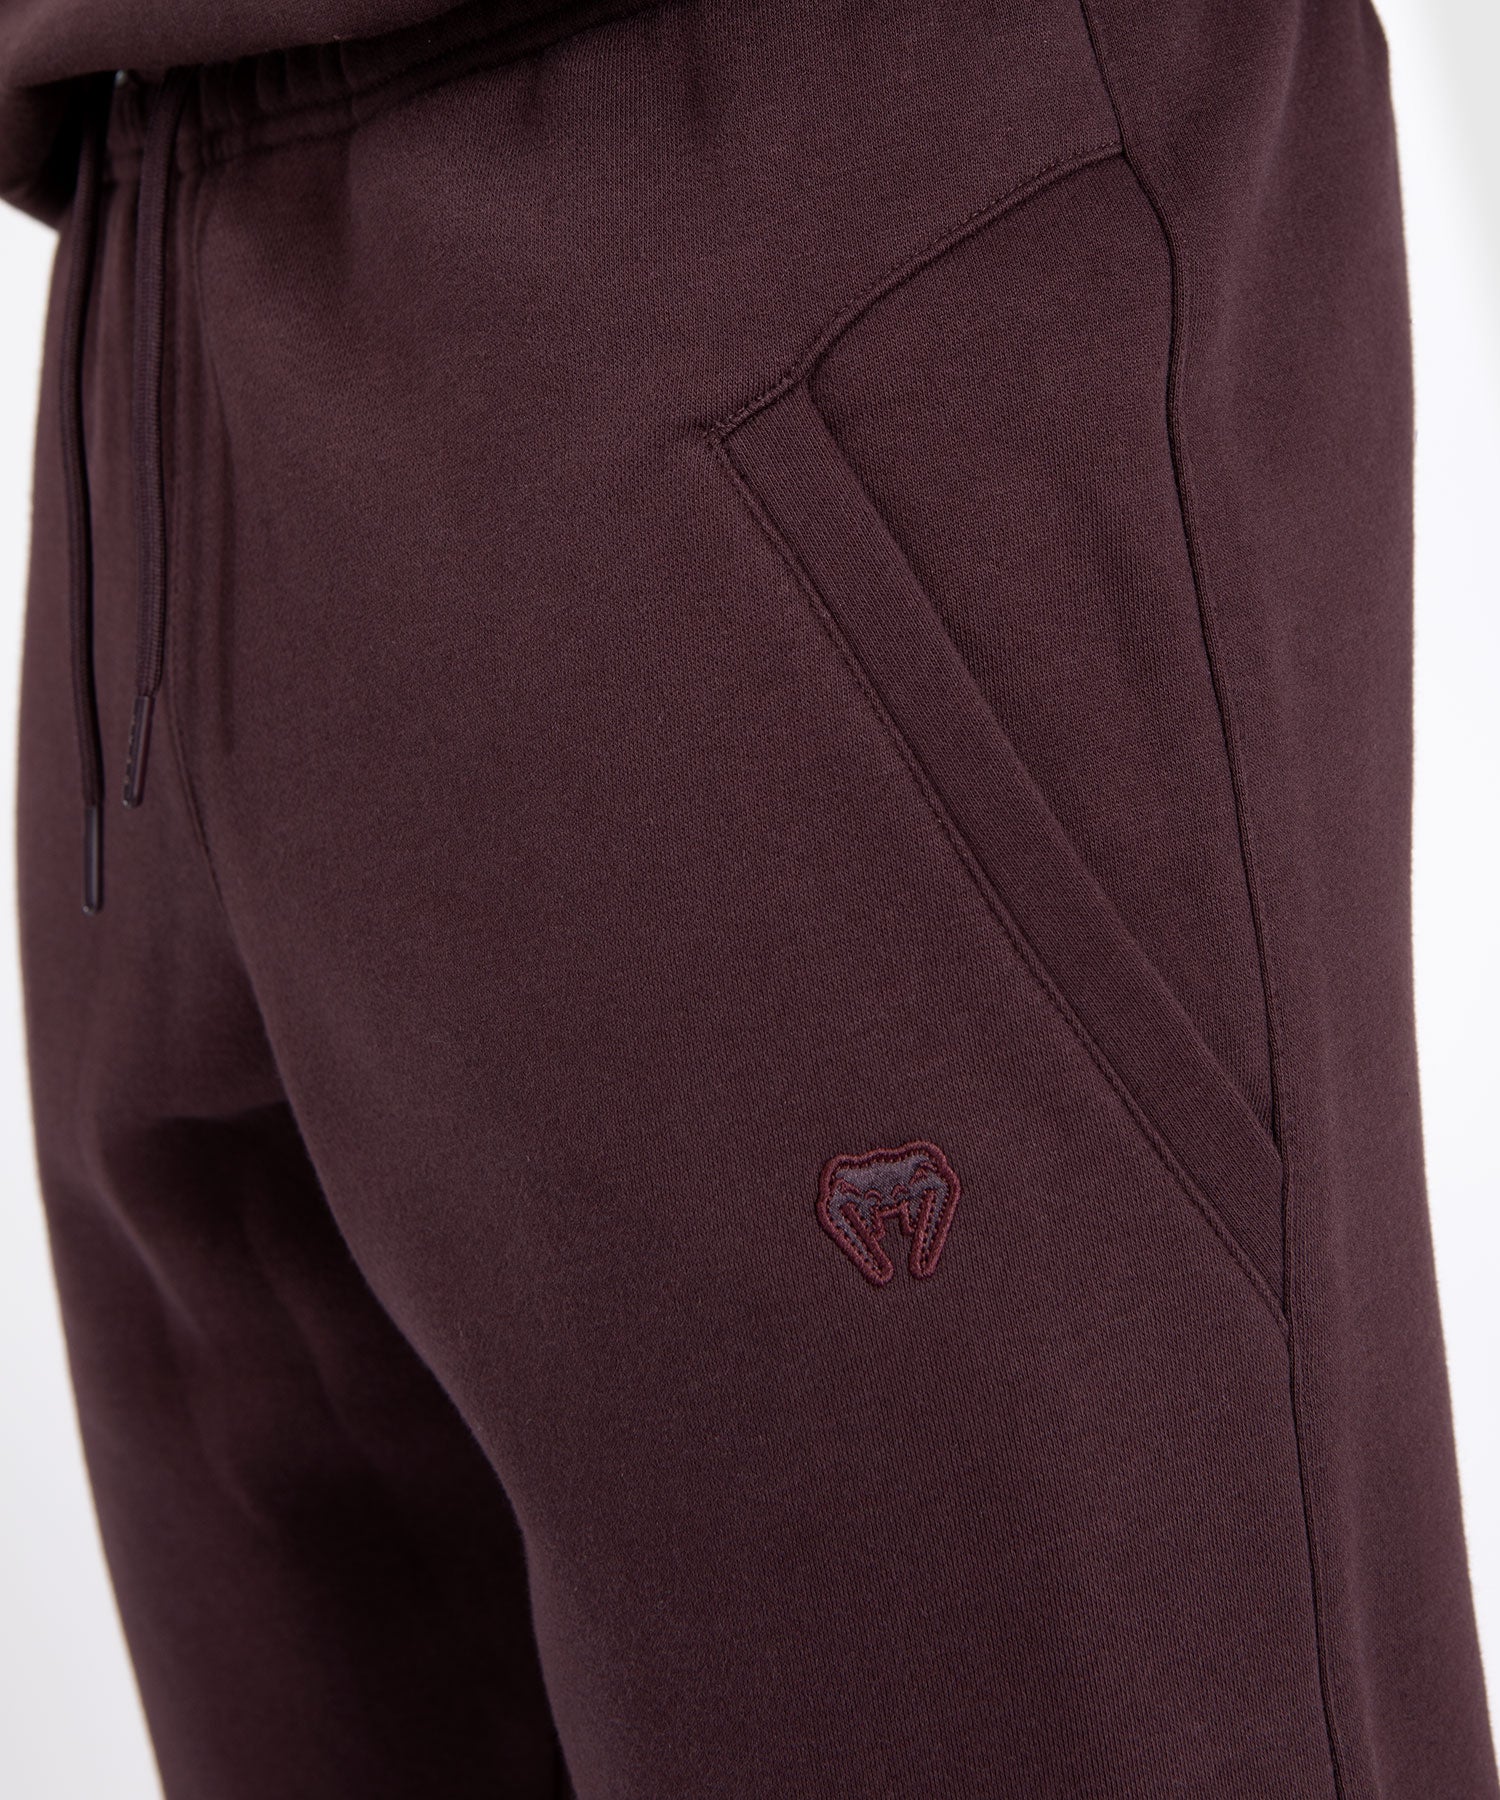 Only 45.00 usd for Venum Silent Power Jogger - Dark Brown Online at the Shop